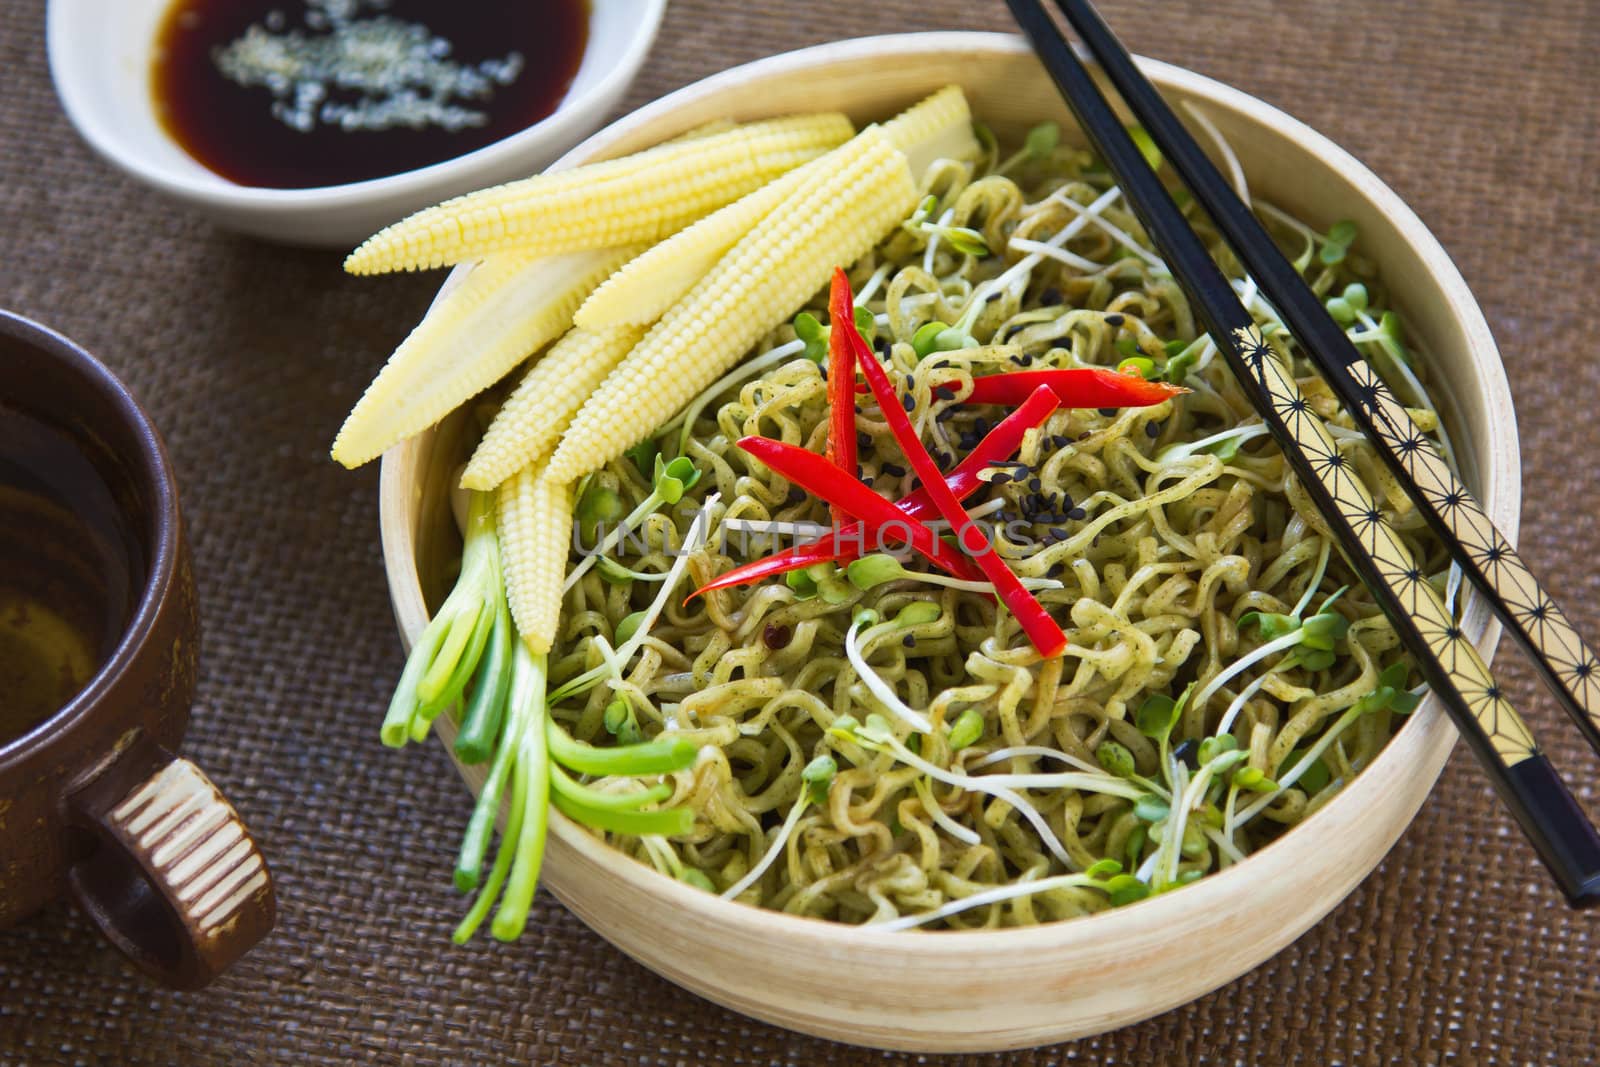 Noodle salad by vanillaechoes